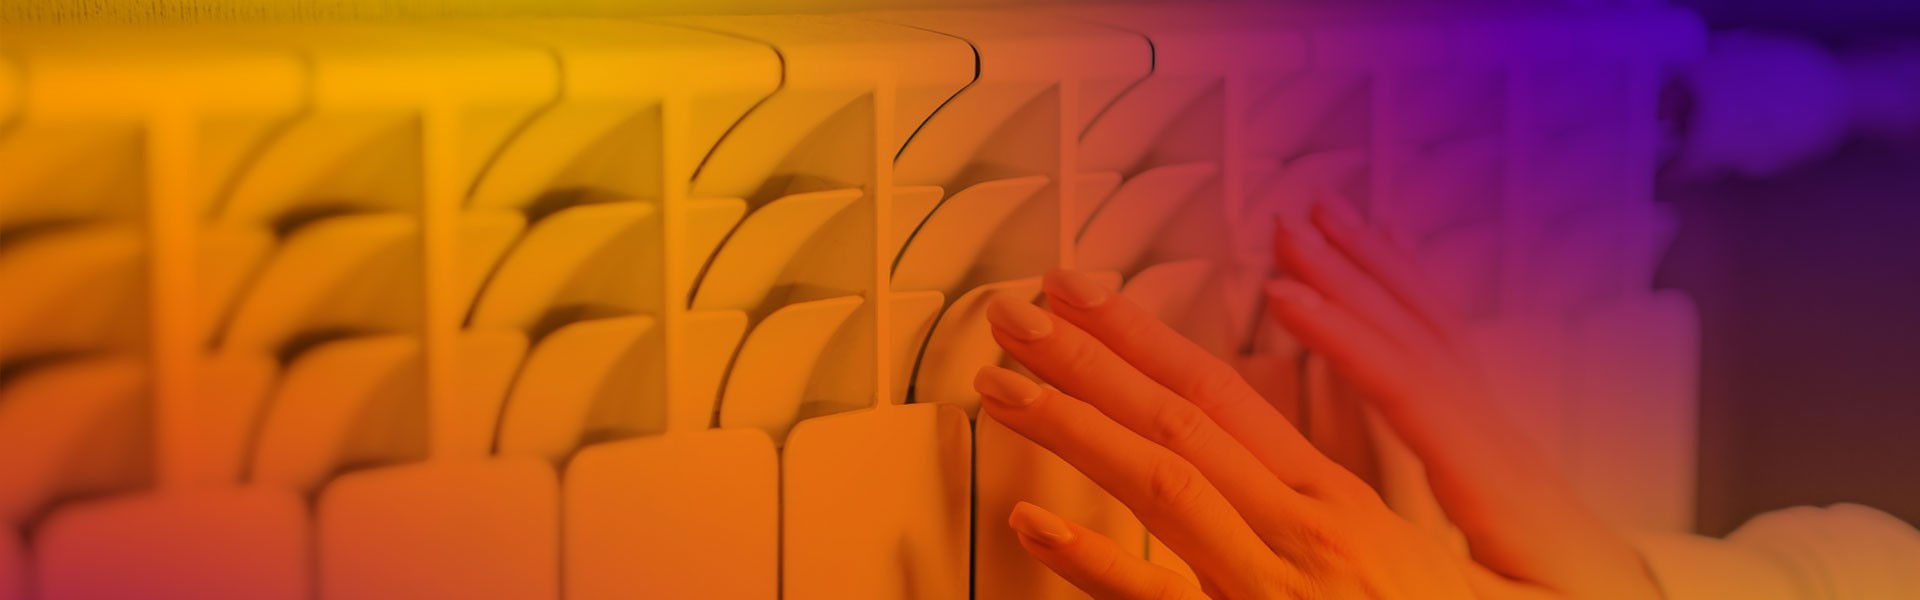 Warming hands on a radiator